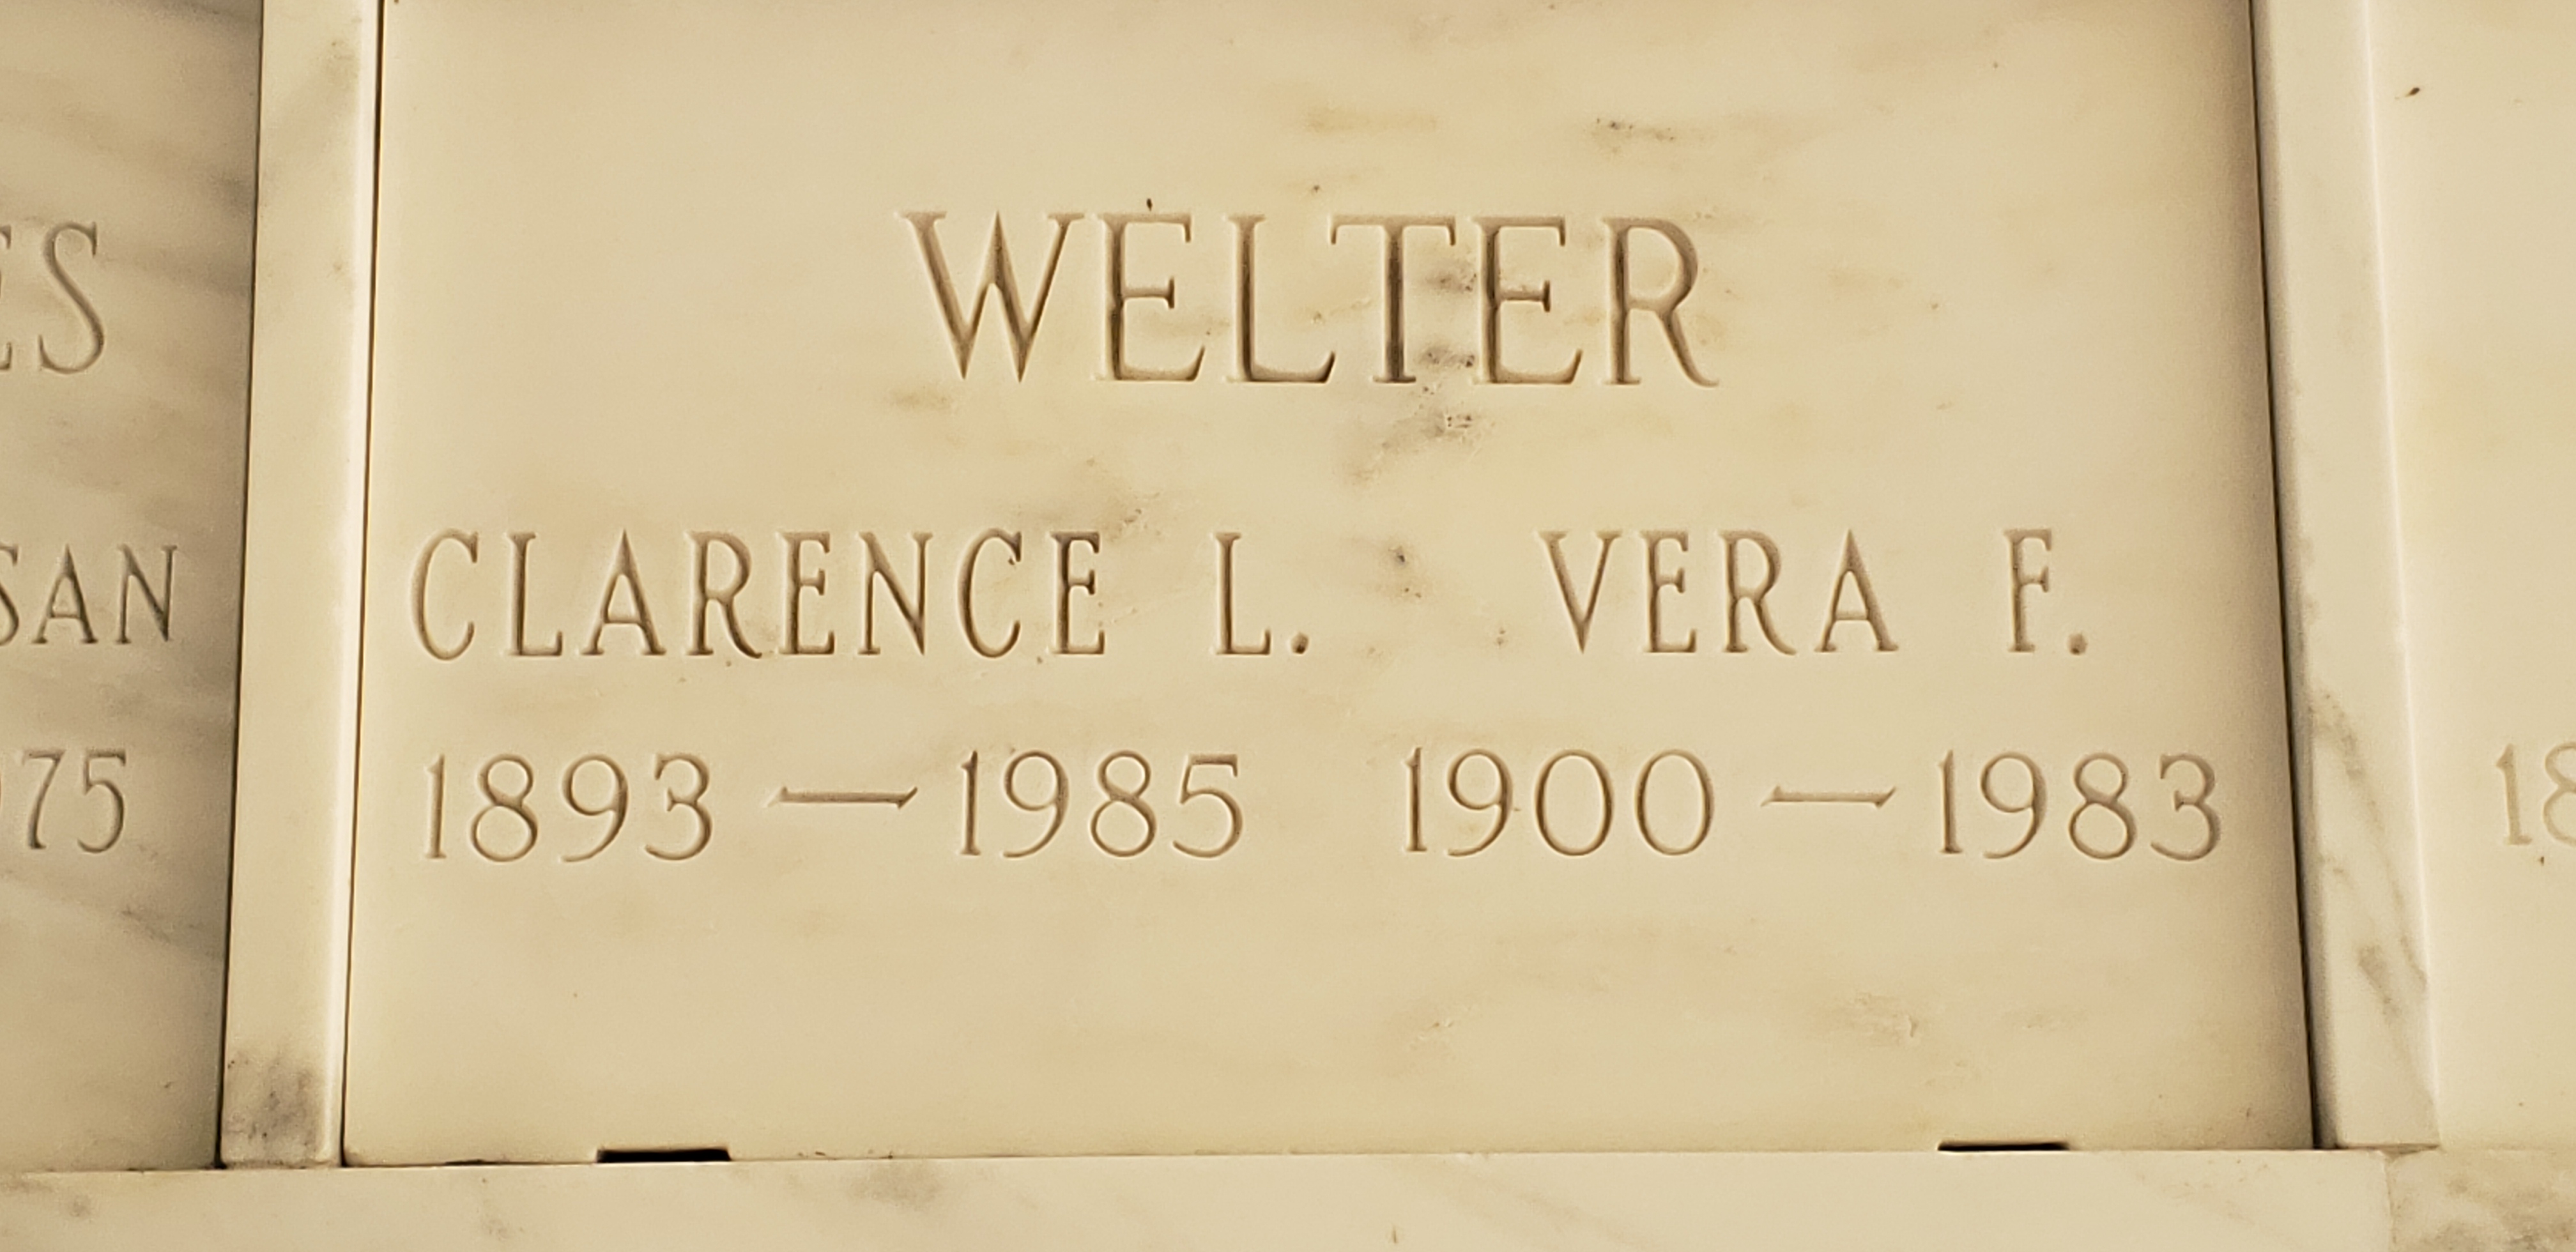 Clarence L Welter